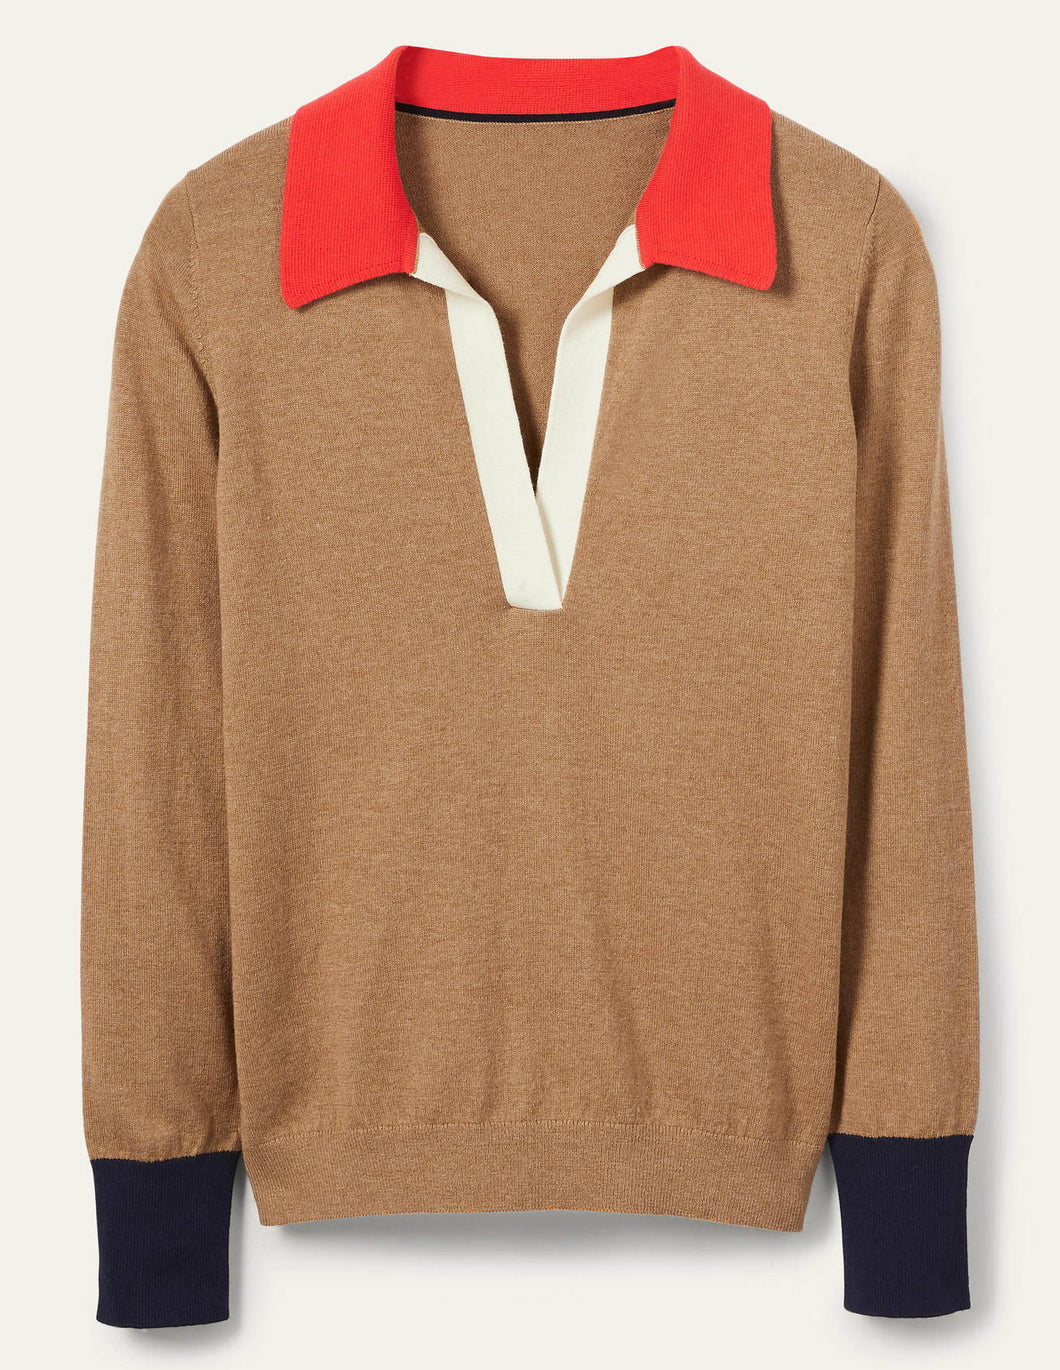 Boden Color Block Collared Sweater